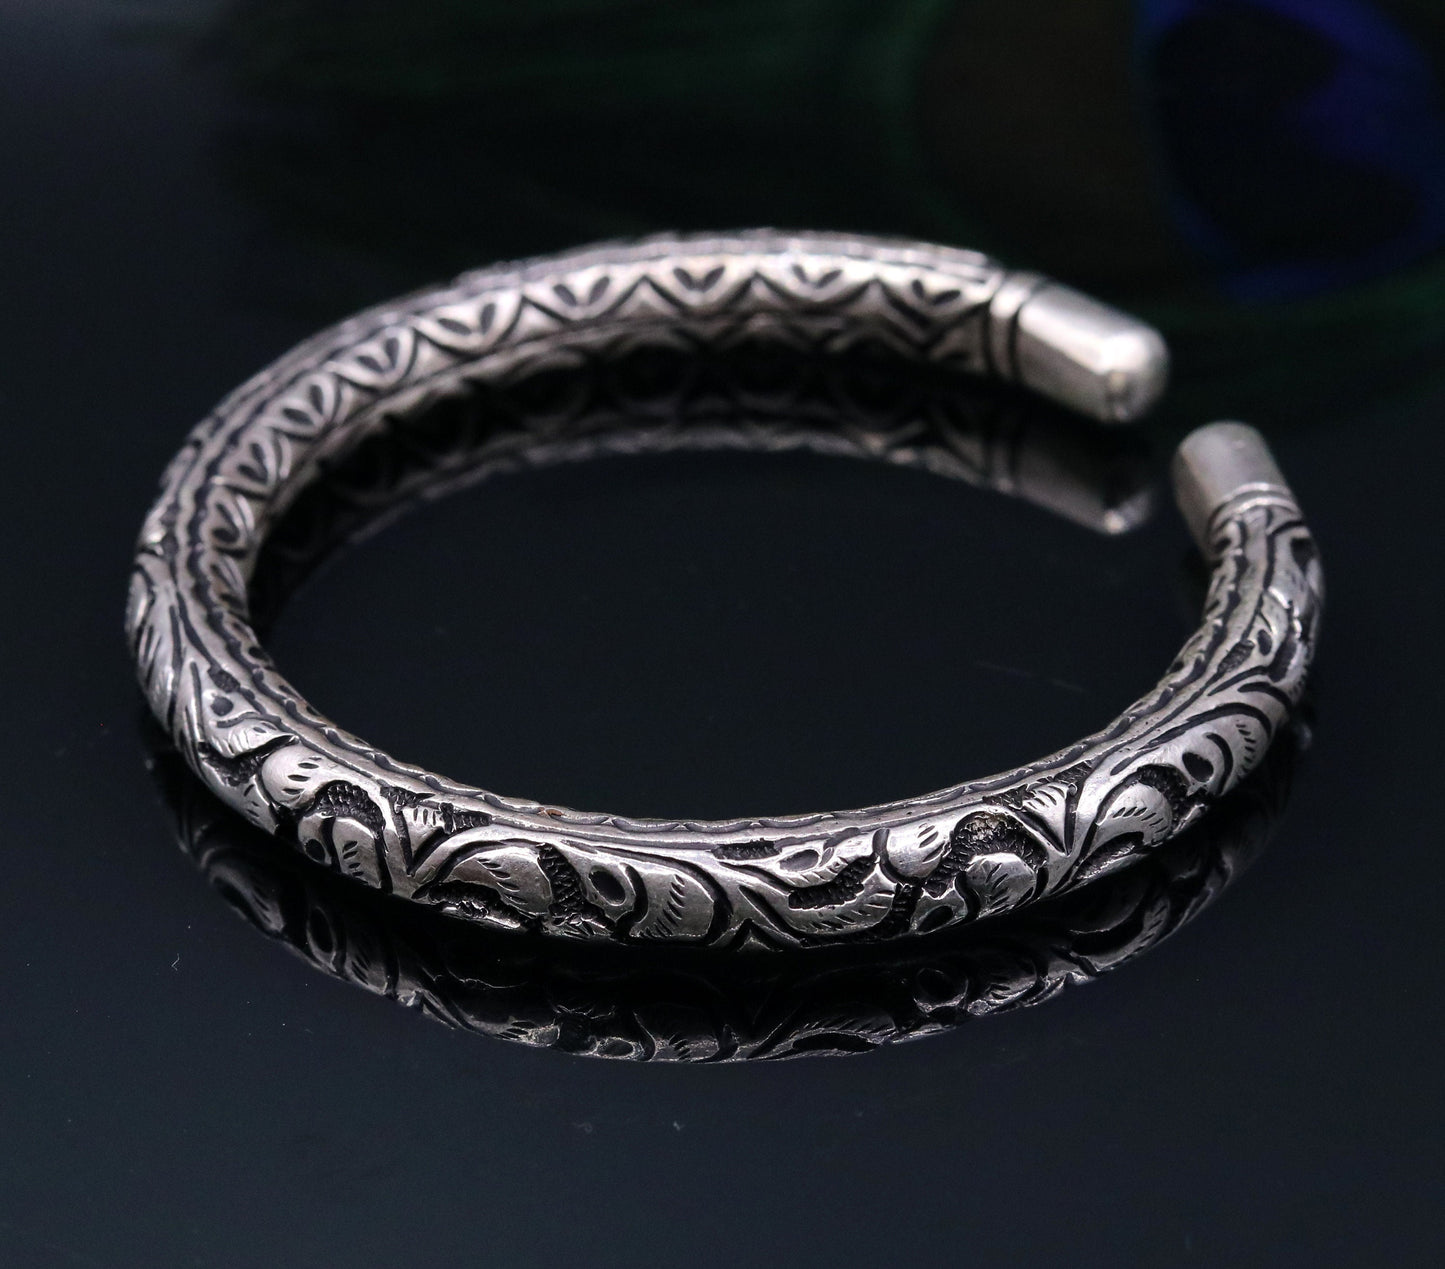 Fabulous 925 sterling silver handmade amazing engraving design wrist bangle bracelet kada, top class jewelry from Rajasthan India nsk63 - TRIBAL ORNAMENTS